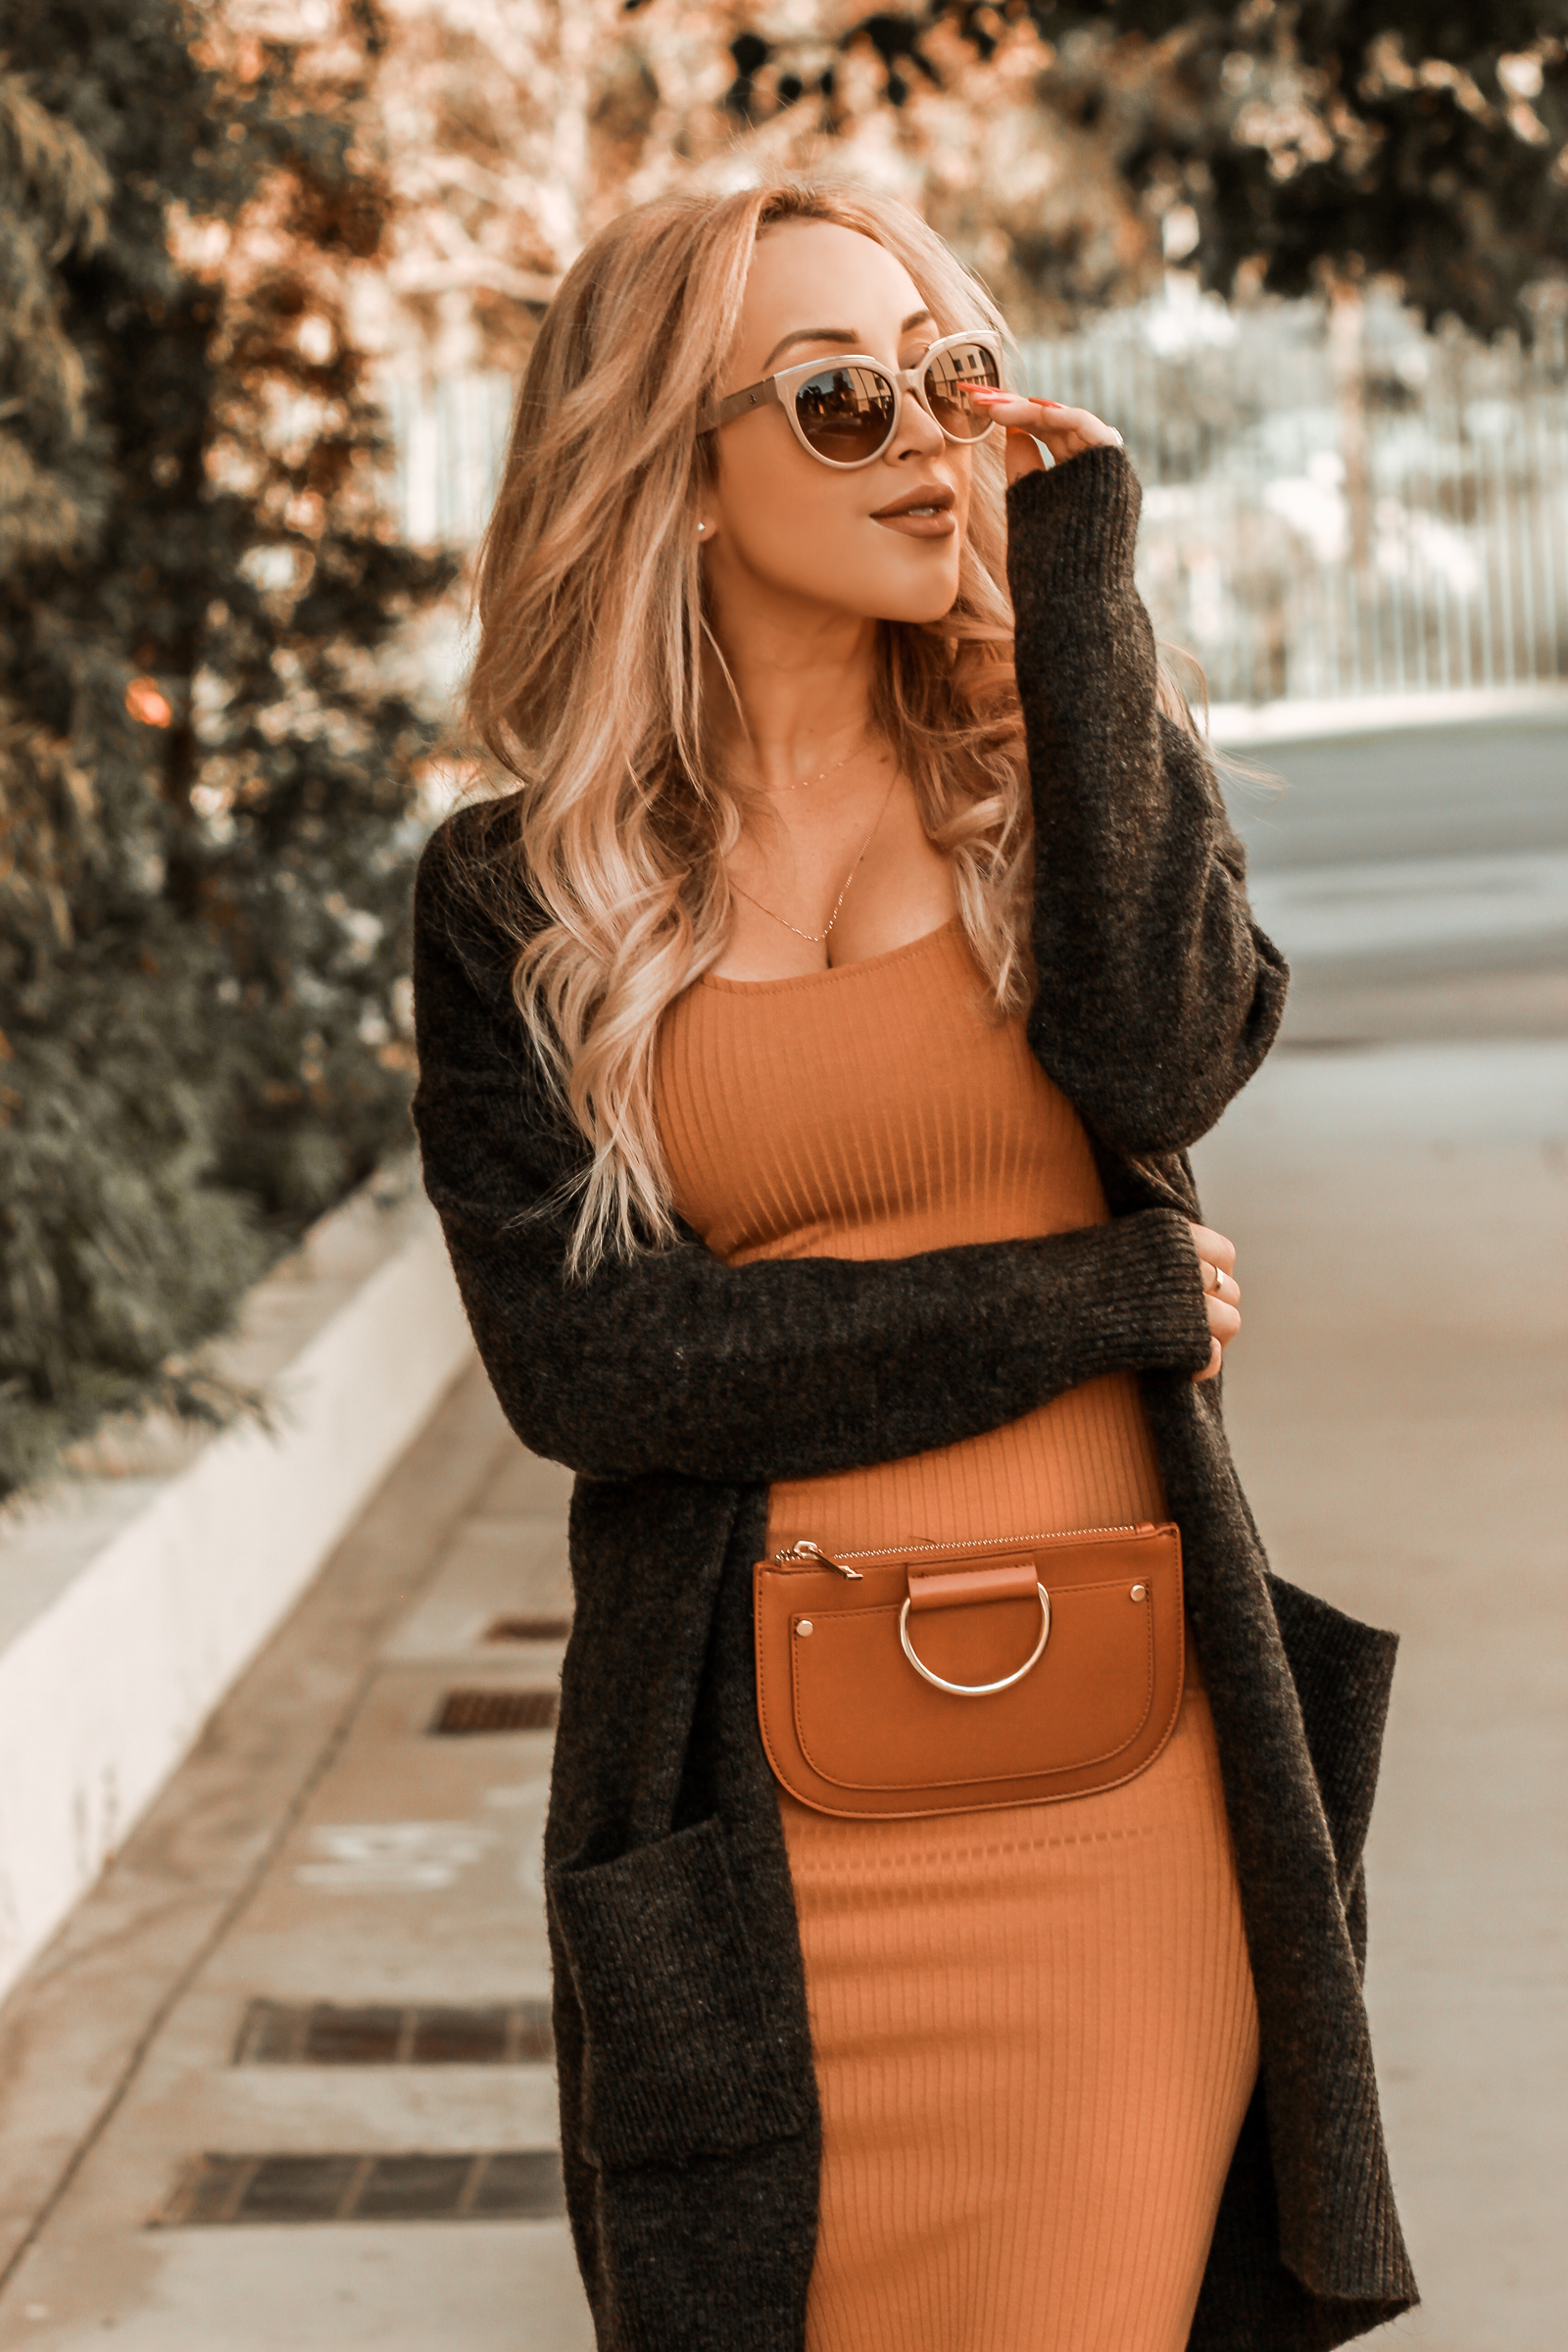 Thanksgiving Outfit Inspo | Fall Fashion | Forever 21 | Pumpkin Orange | Blondie in the City by Hayley Larue